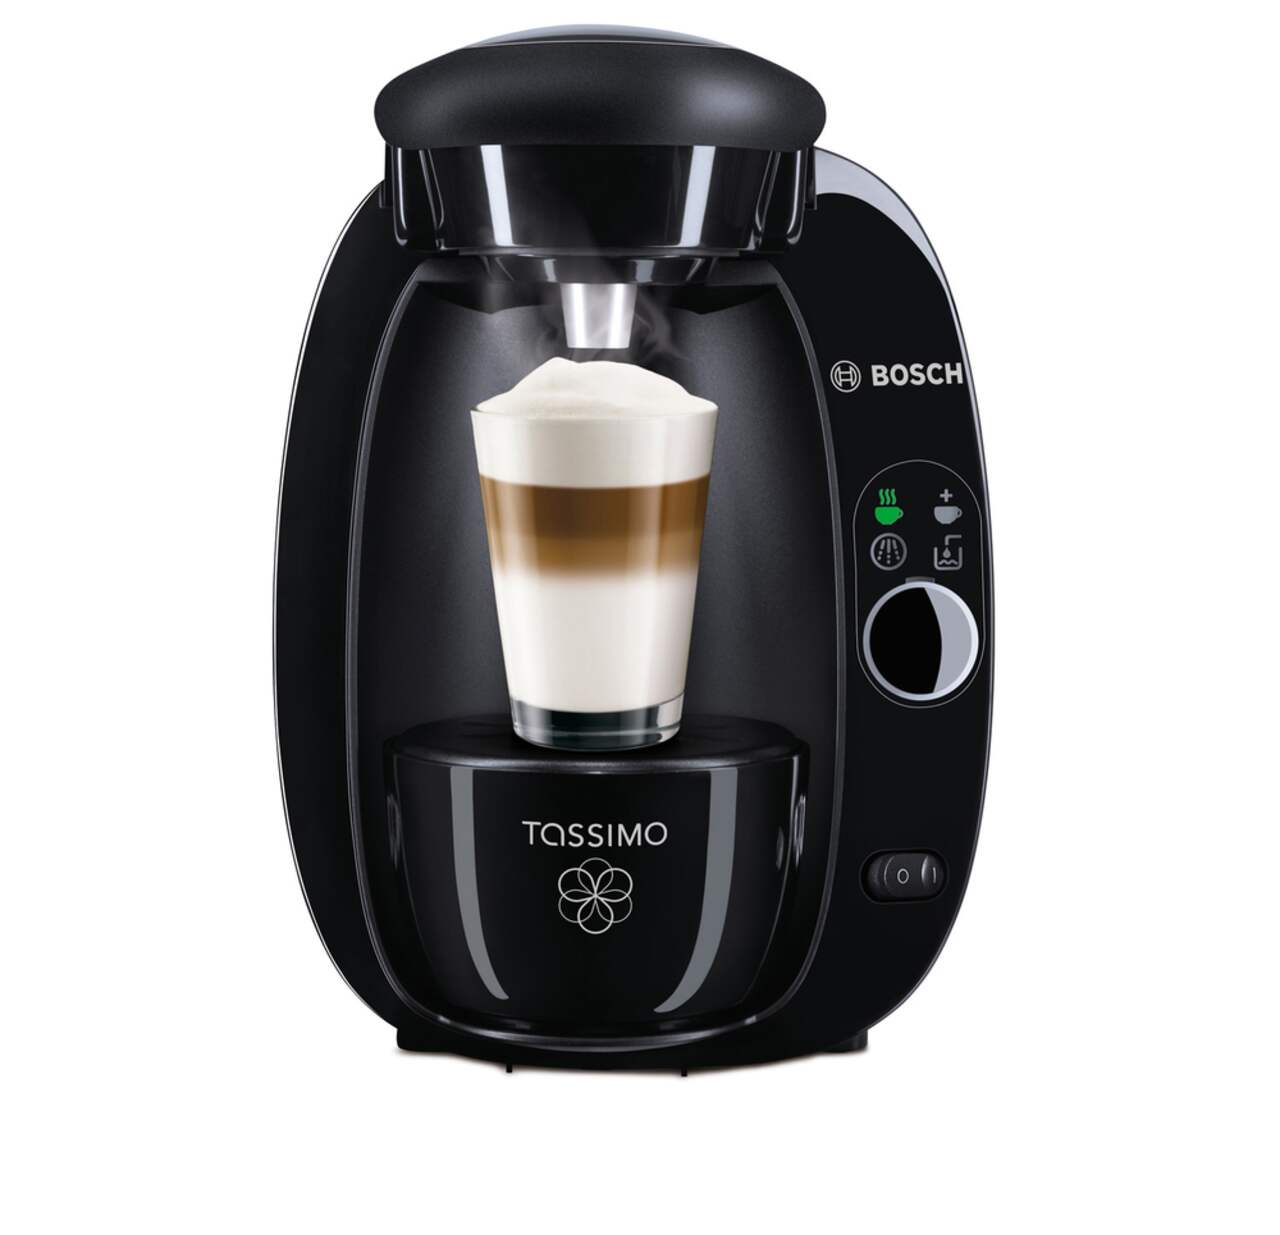 Tassimo Bosch T20 Home Brewing System Silver Grey